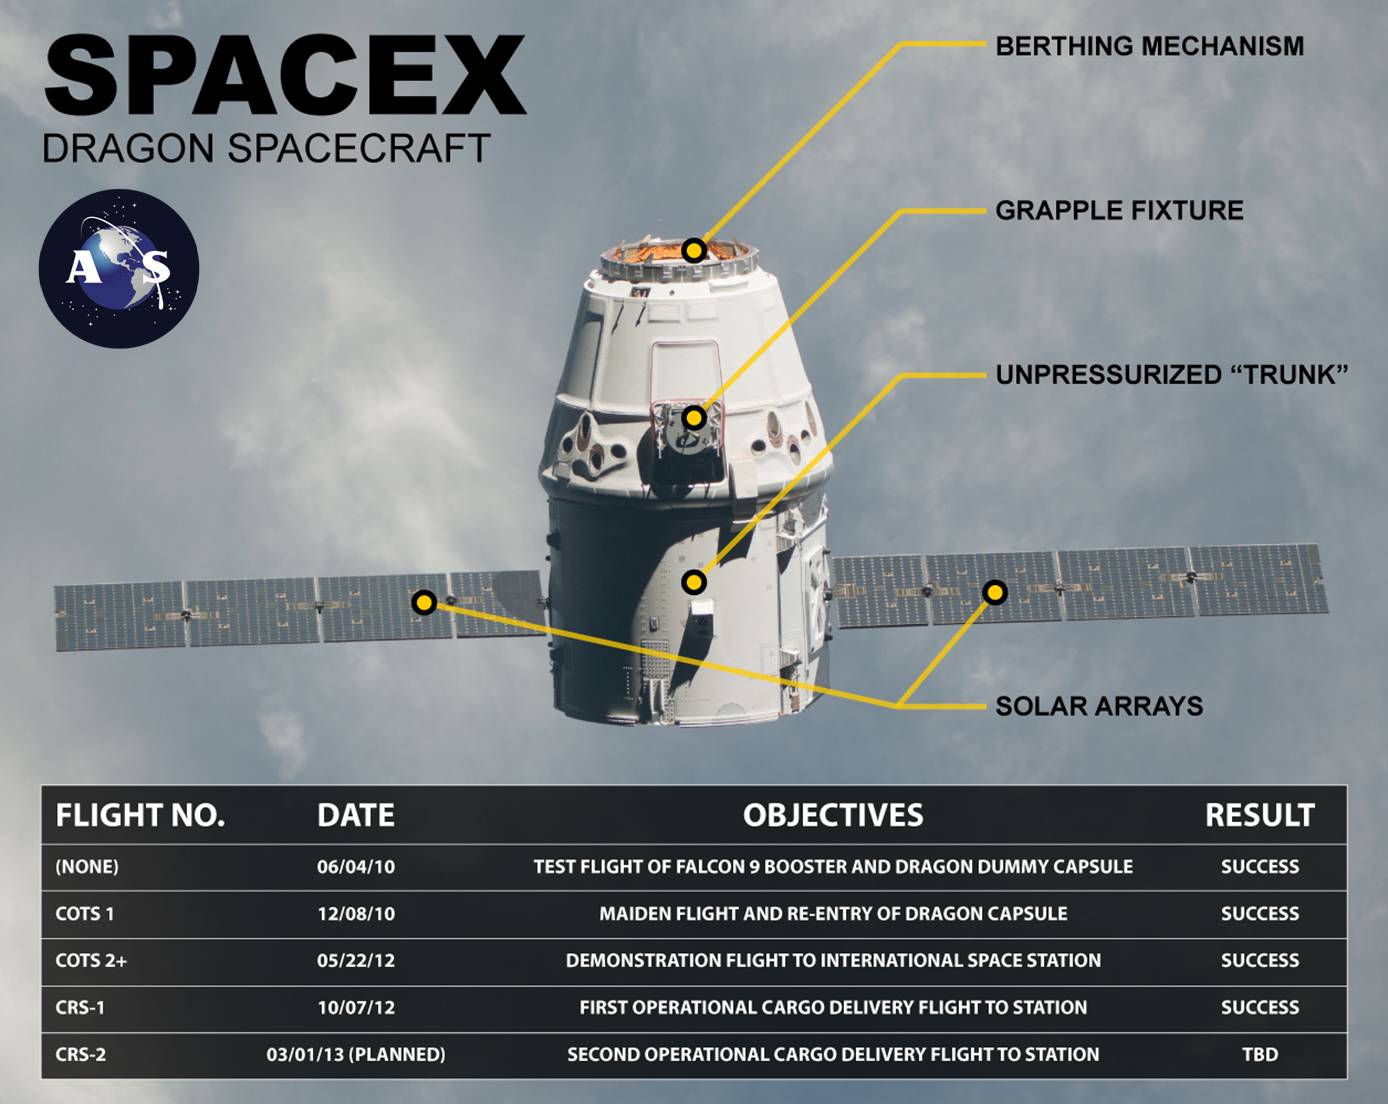 1-AmericaSpace-Infographic-discussing-SpaceX-Dragon-spacecraft.-Image-courtesy-of-NASA-Max-Q-Entertainment.jpg